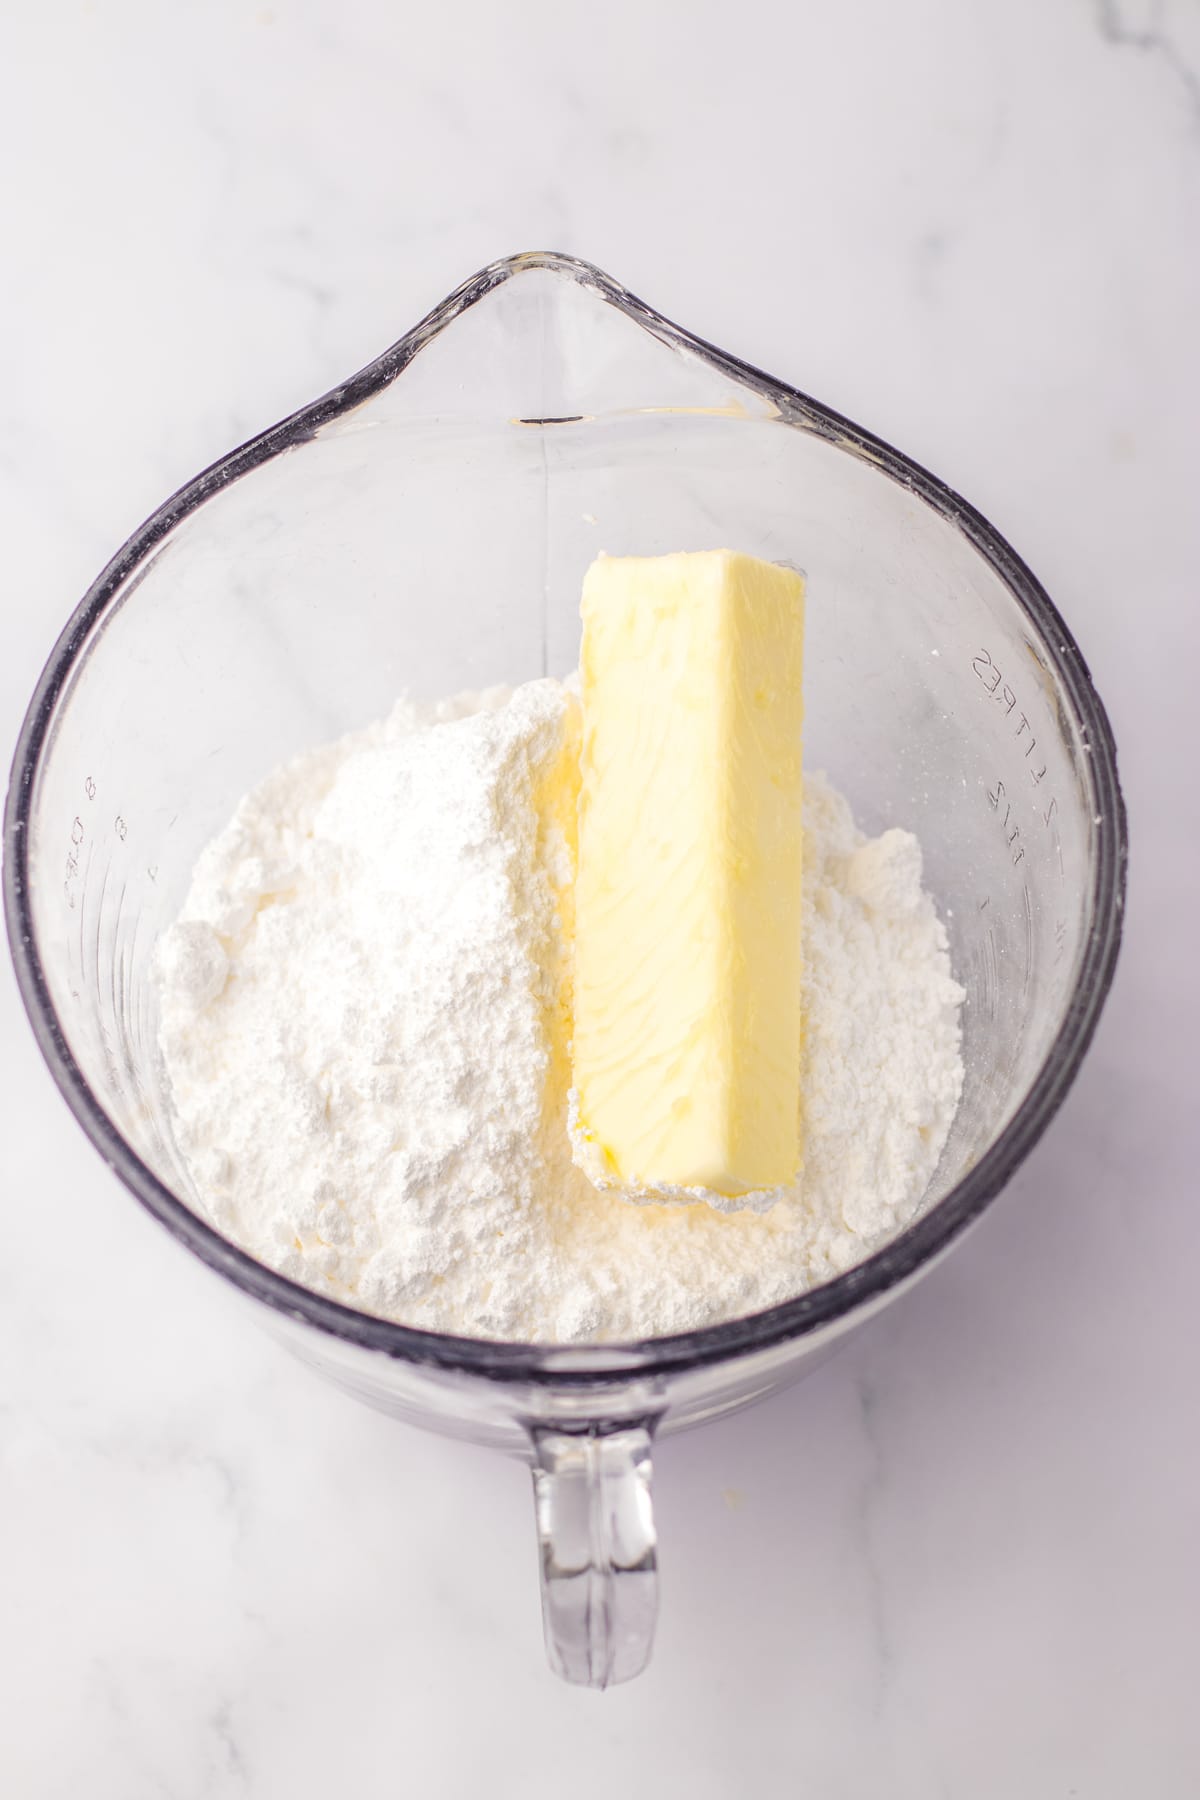 Butter and flour in a glass bowl.